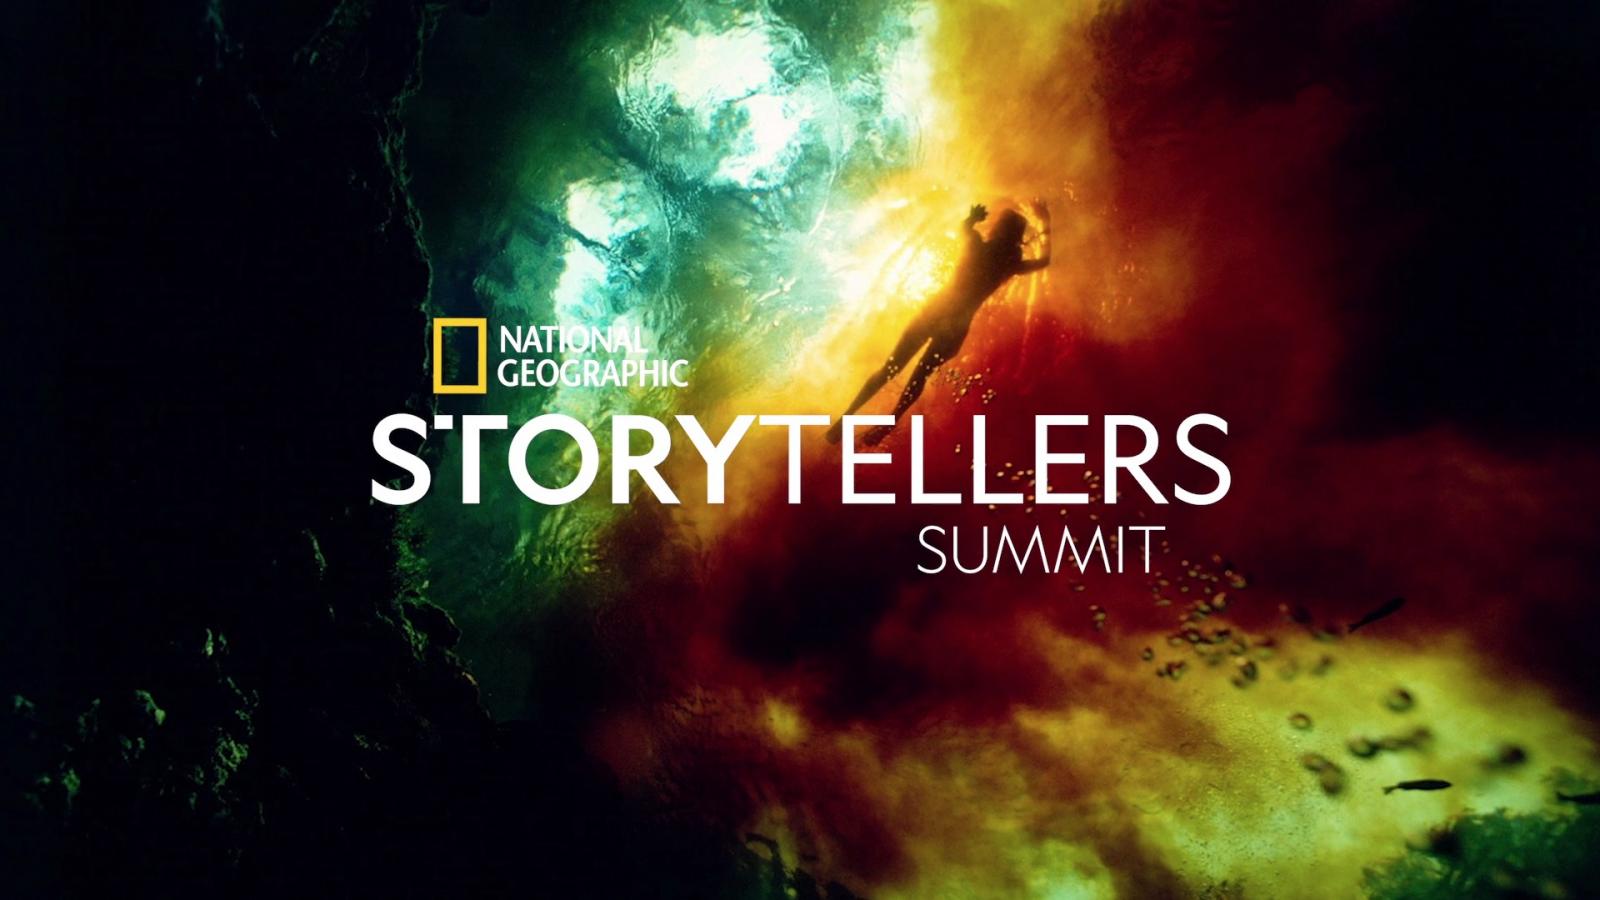 National Geographic Storytellers Summit 2021